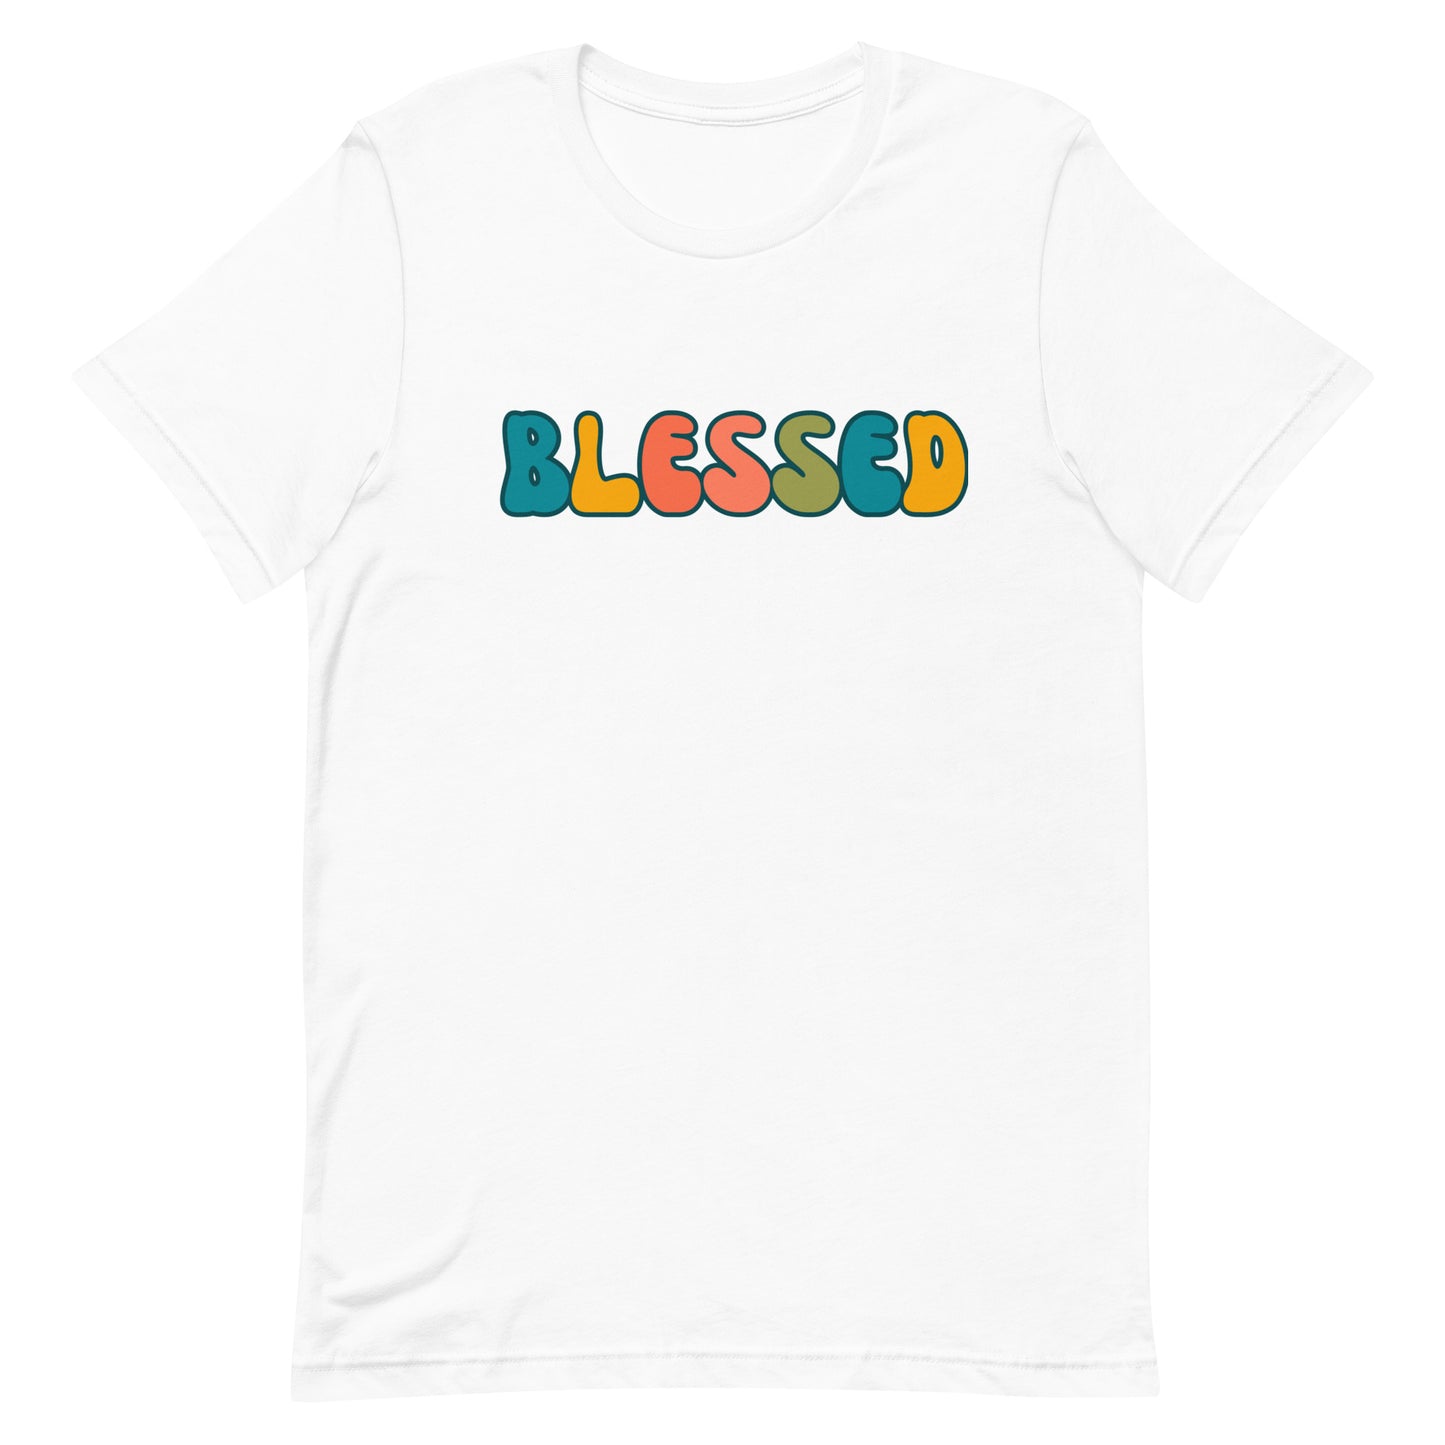 BLESSED t-shirt